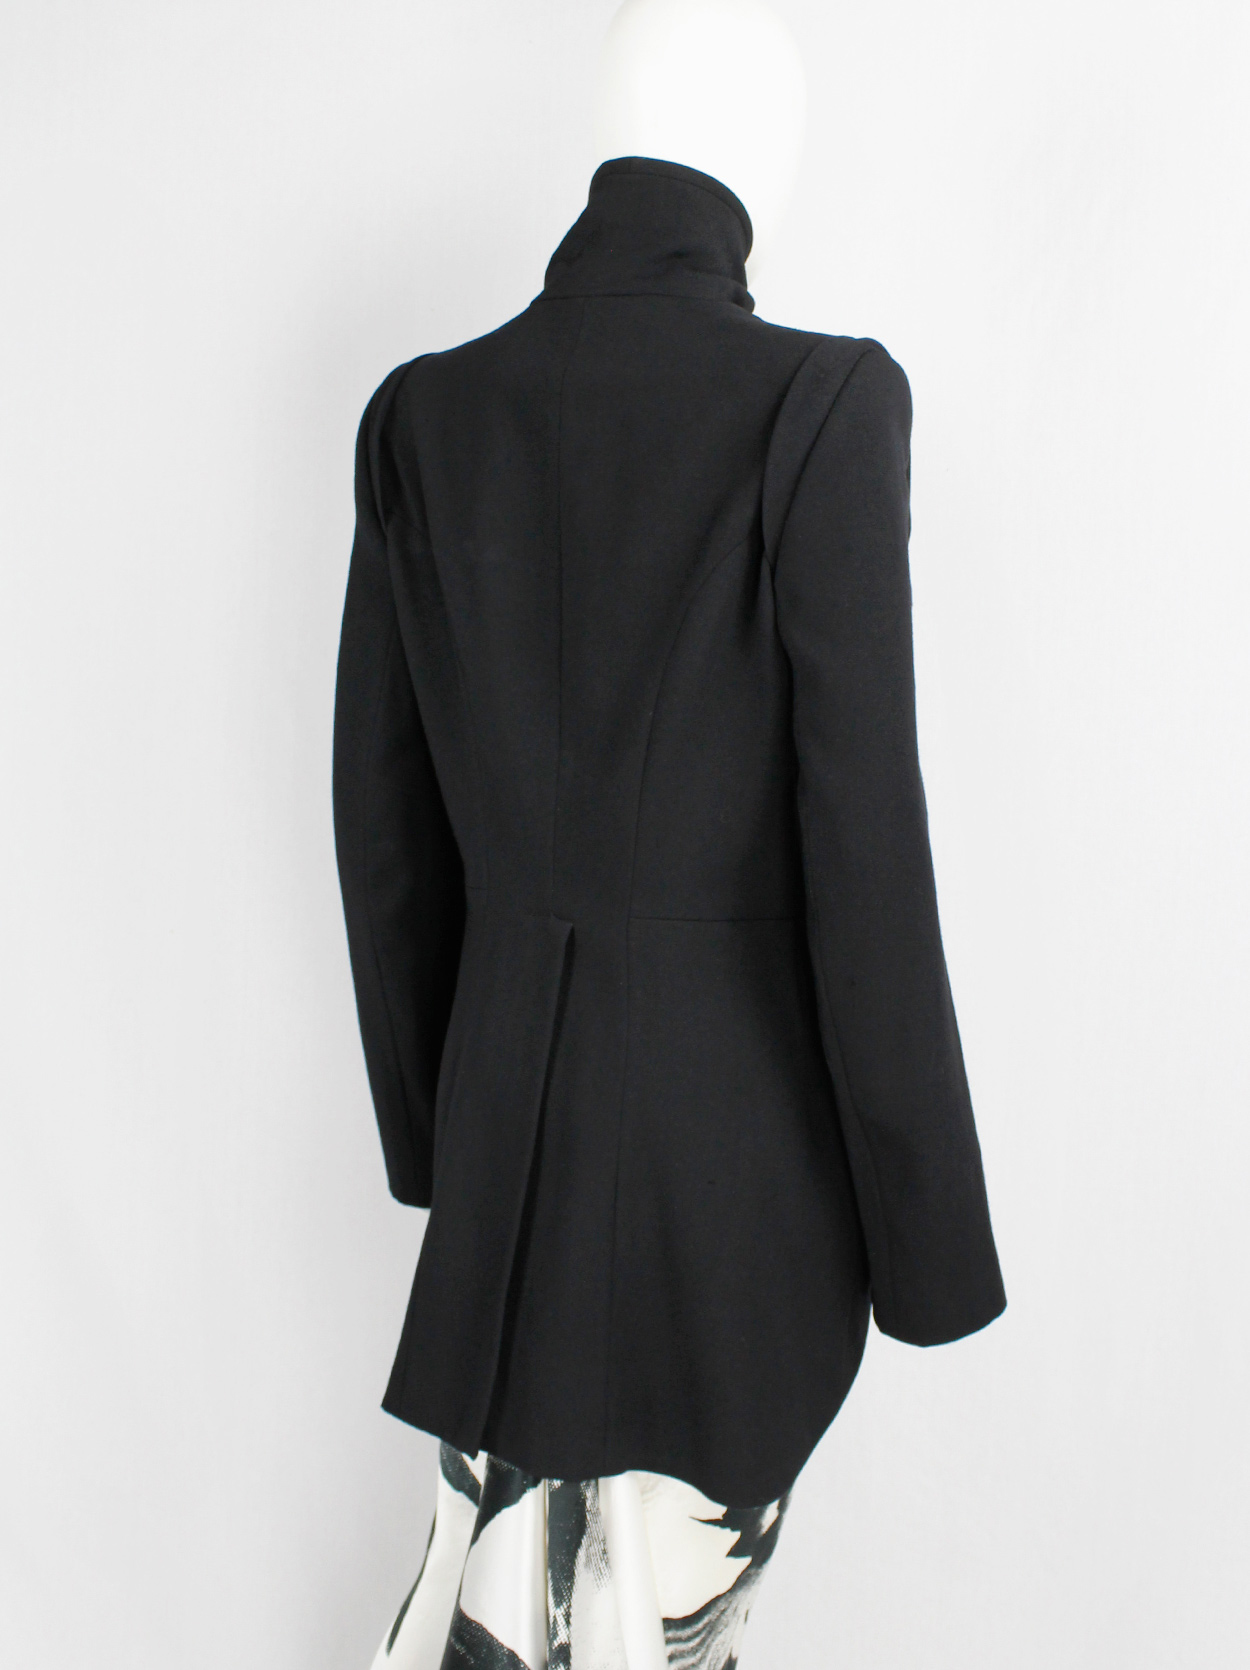 Ann Demeulemeester black cutaway tailcoat with curved buttoned front ...